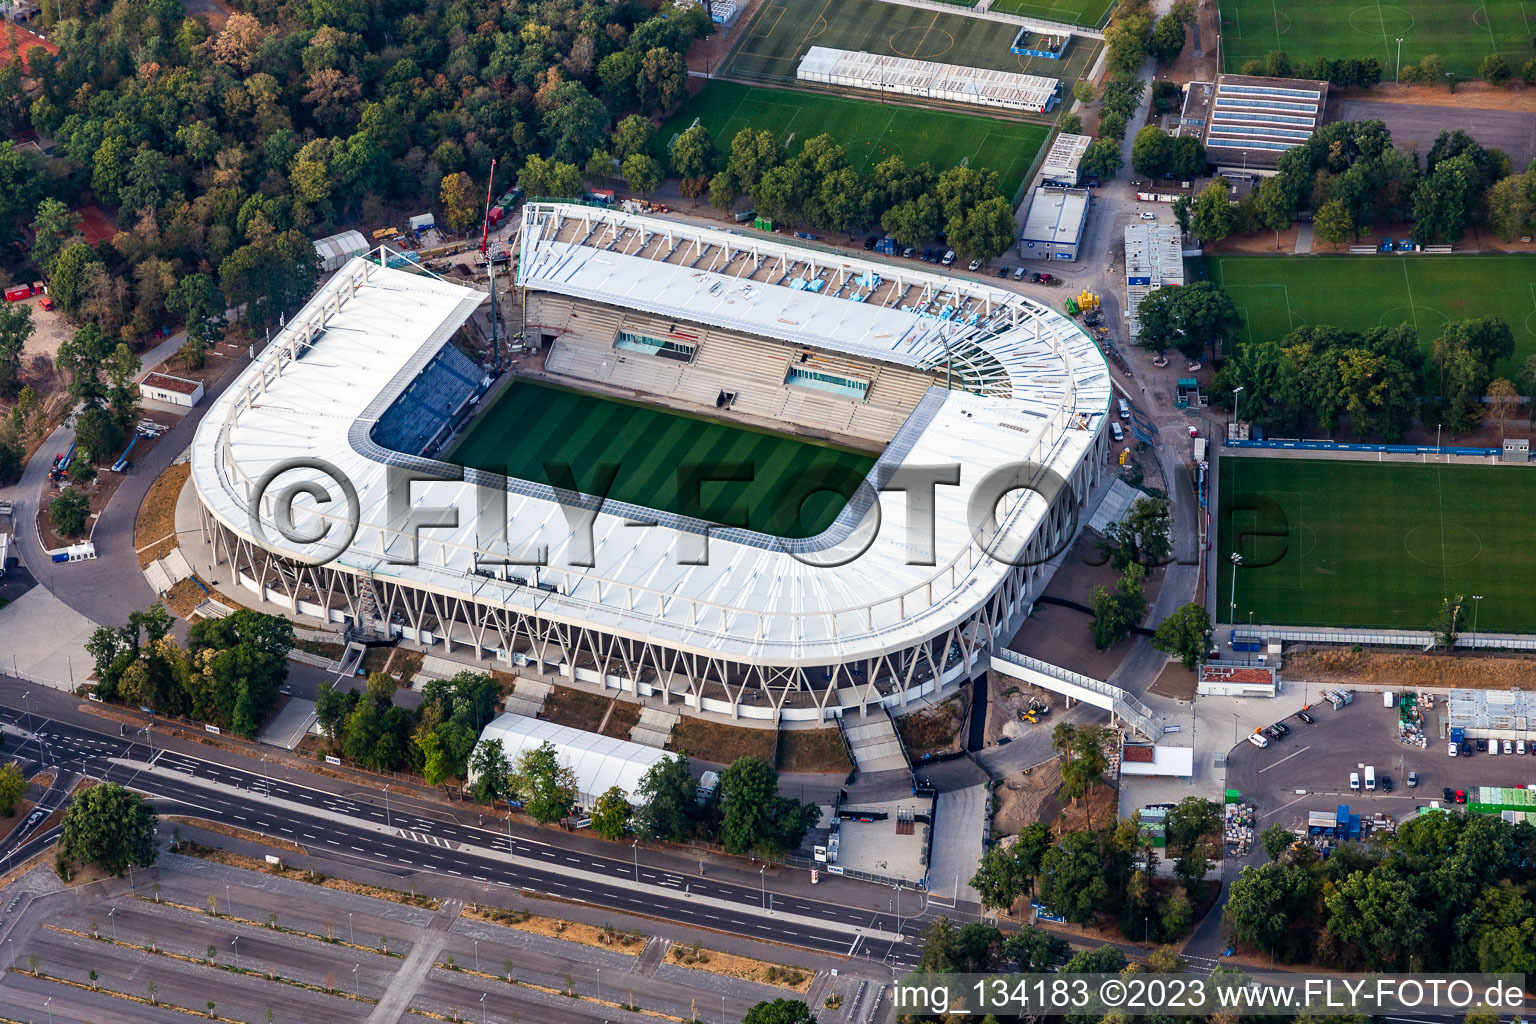 Oblique view of New construction site for the Wildpark Stadium of the Karlsruher Sport-Club GmbH & Co. KGaA in the district Innenstadt-Ost in Karlsruhe in the state Baden-Wuerttemberg, Germany